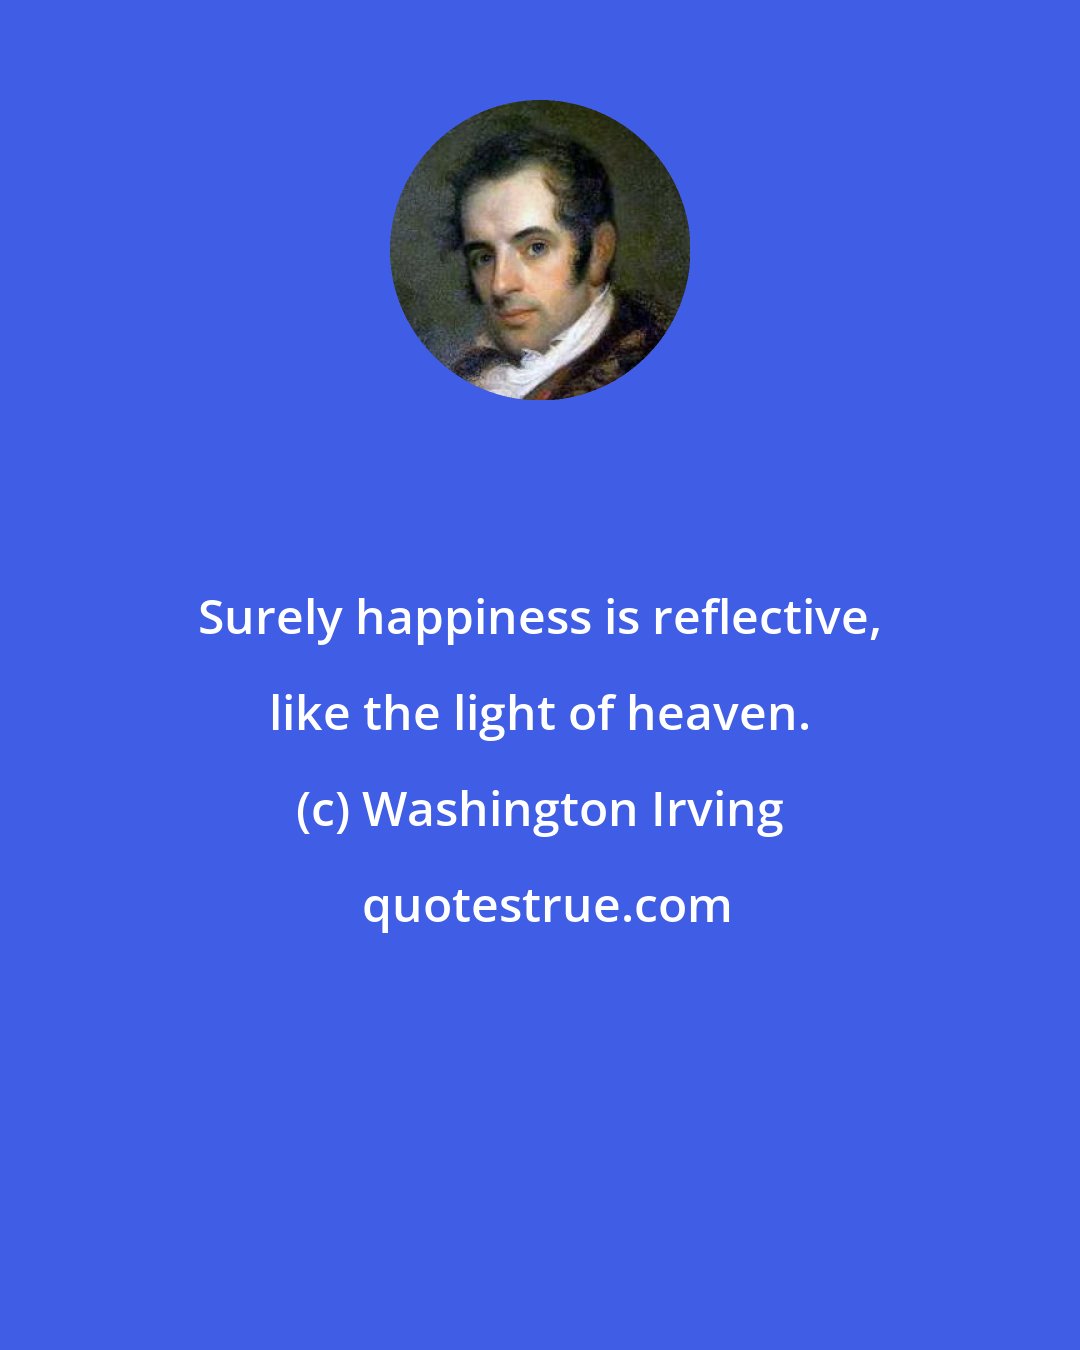 Washington Irving: Surely happiness is reflective, like the light of heaven.